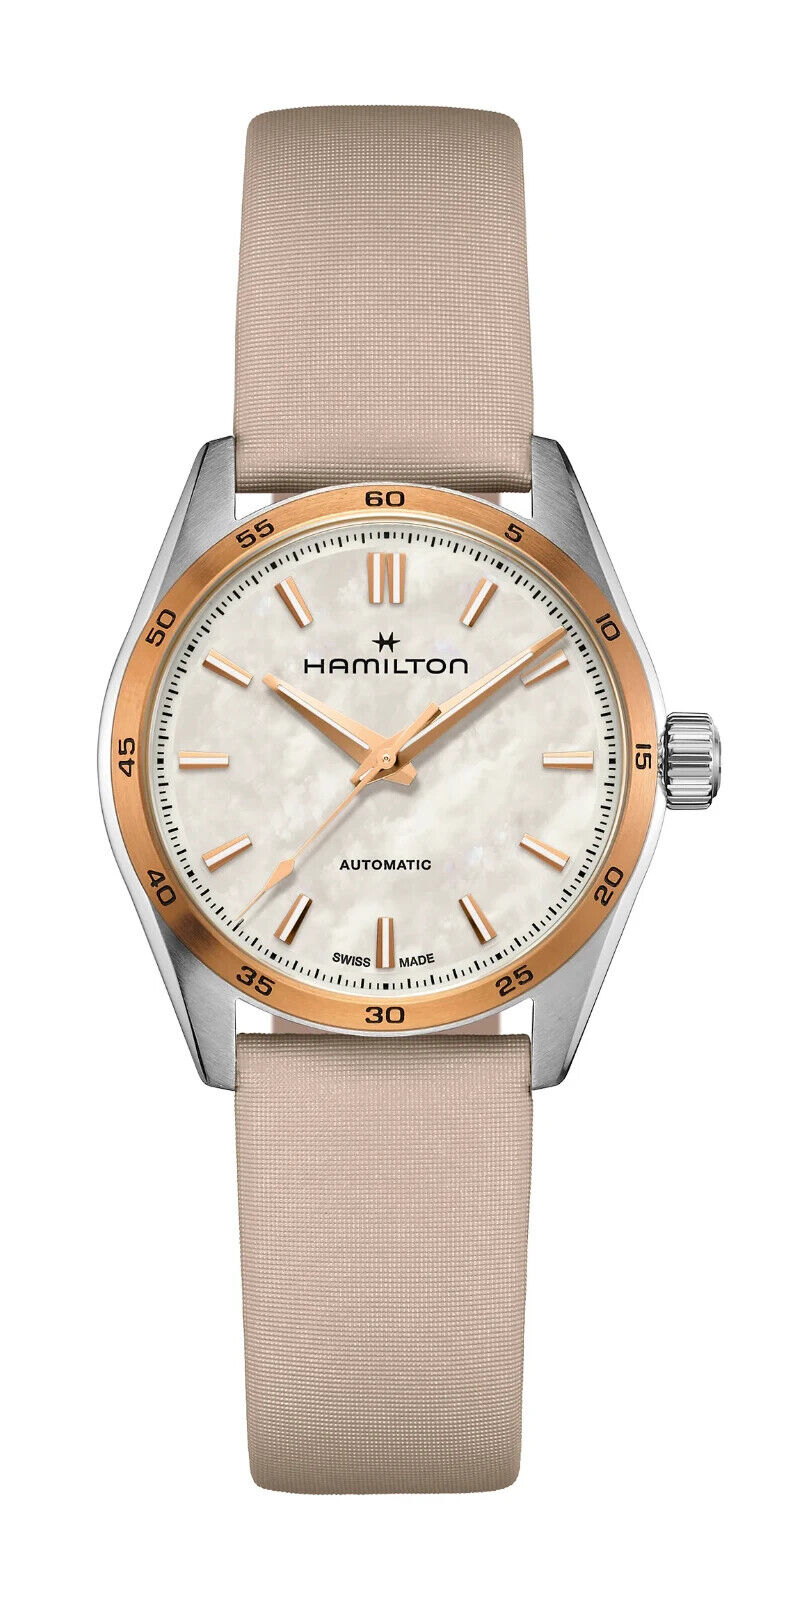 Hamilton 34mm Jazzmaster Automatic ( H36125890)
Rose PVD over Stainless Steel